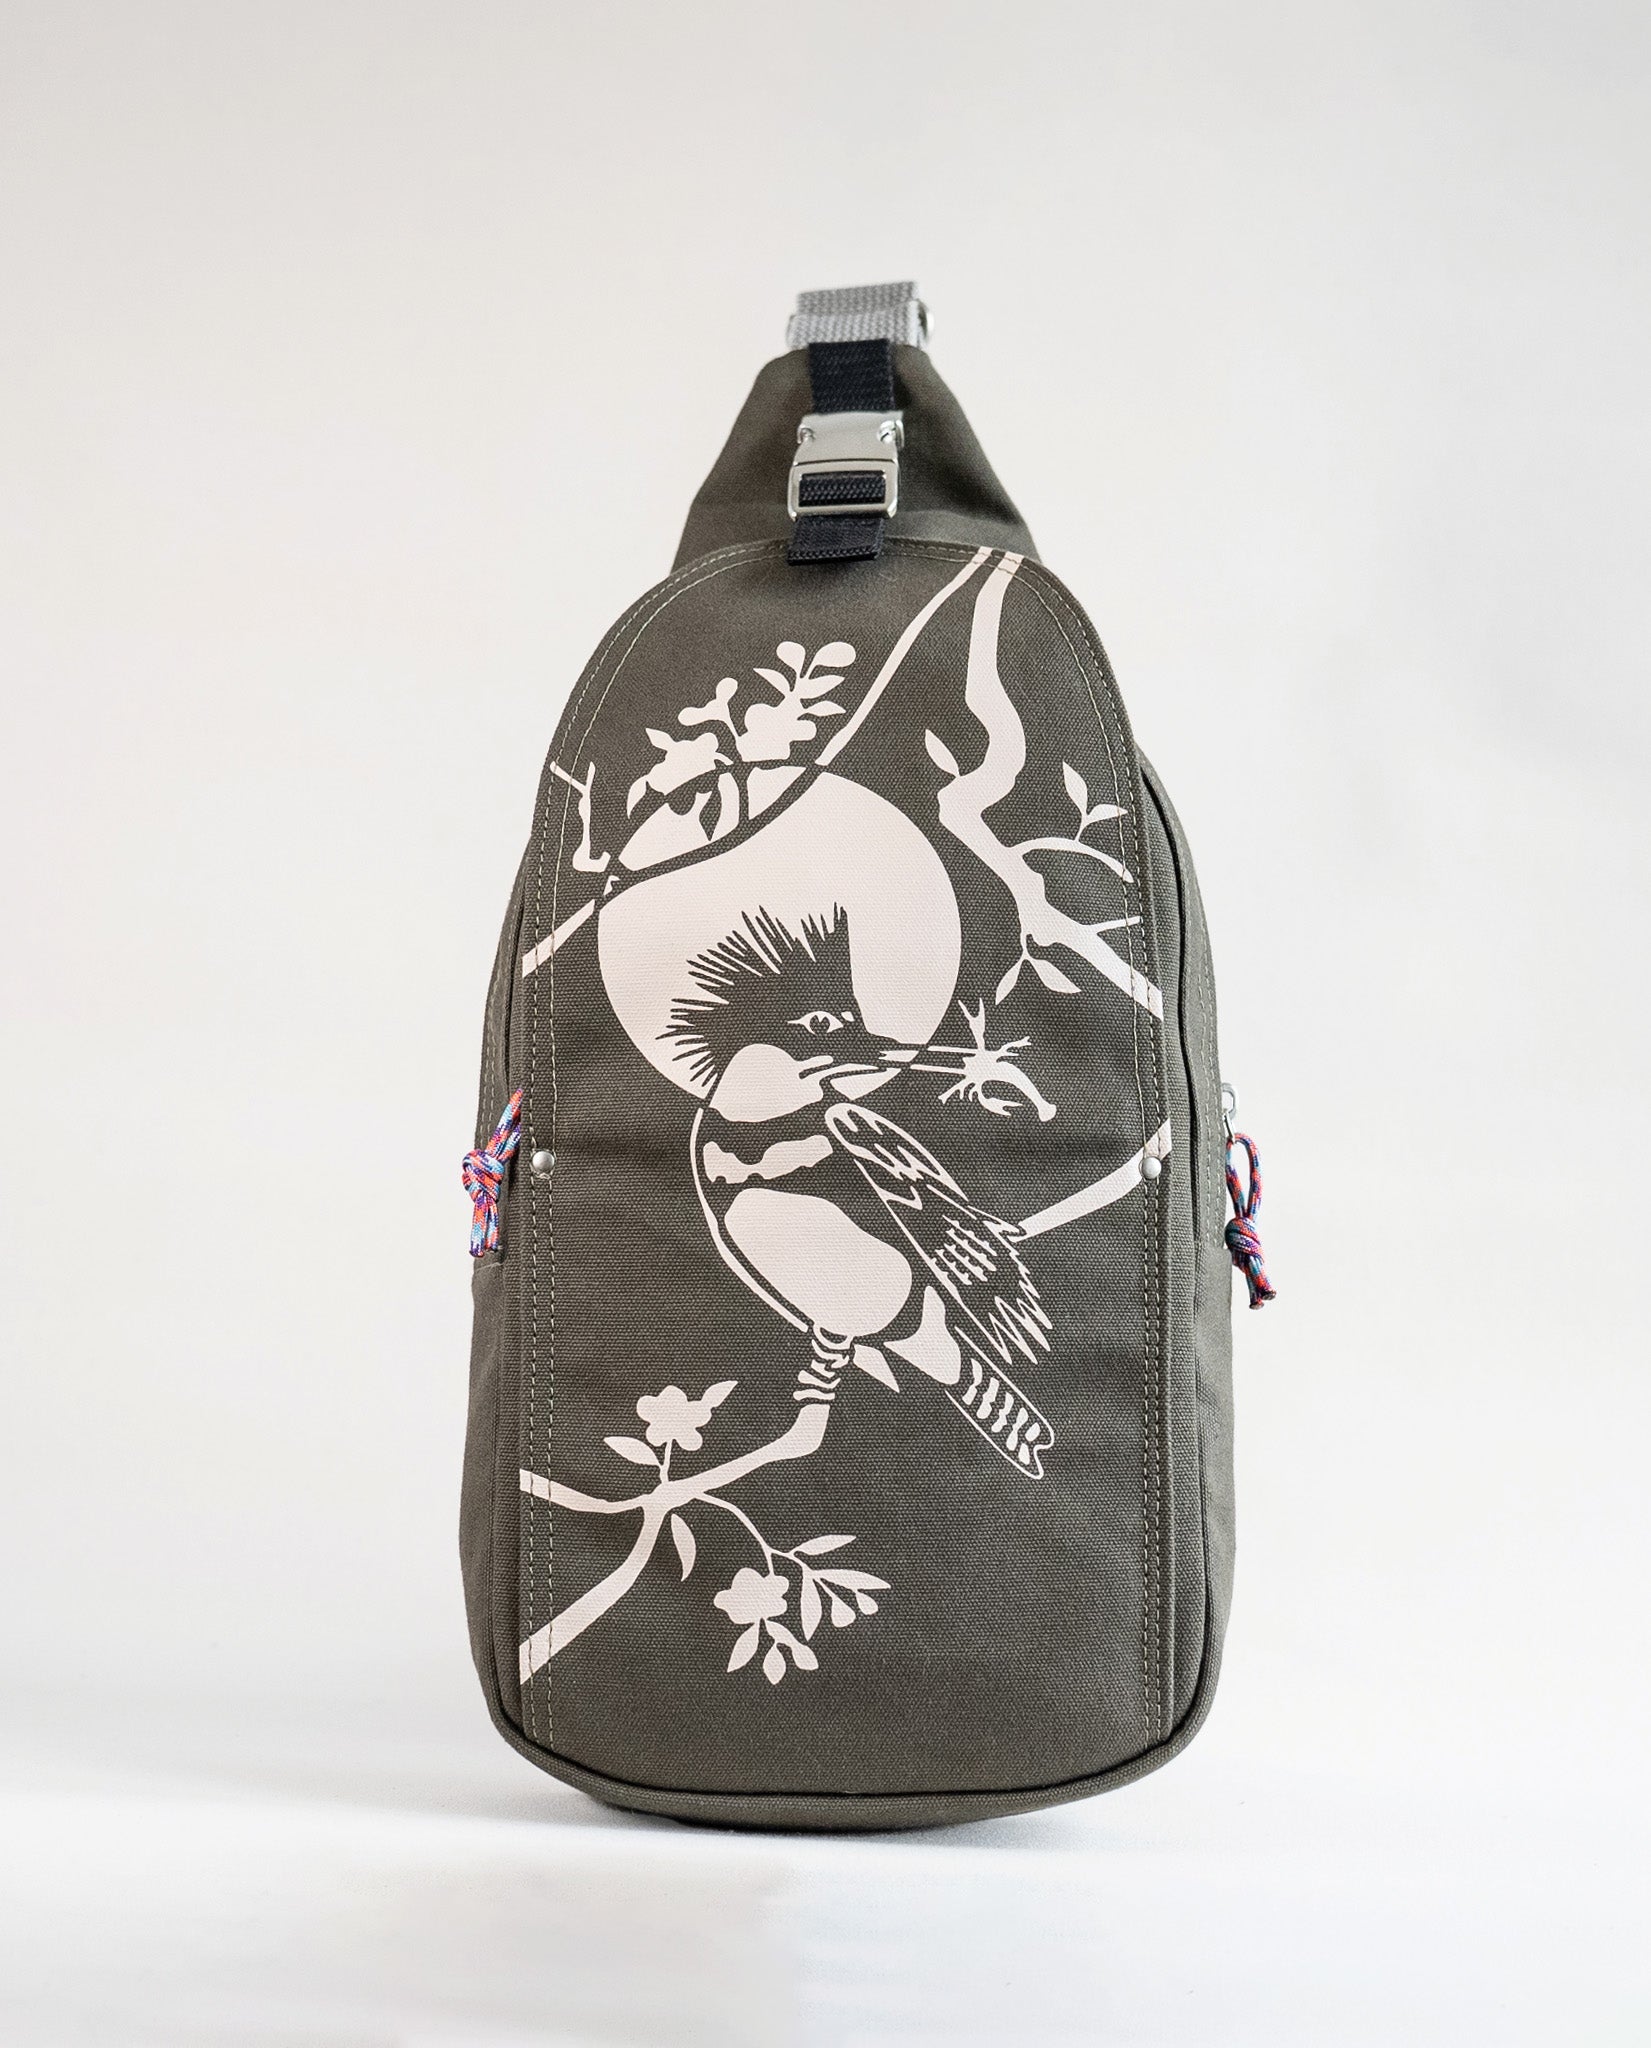 Front exterior of Dock 5’s Kingfisher Canvas Sling Bag in olive featuring art from owner Natalija Walbridge